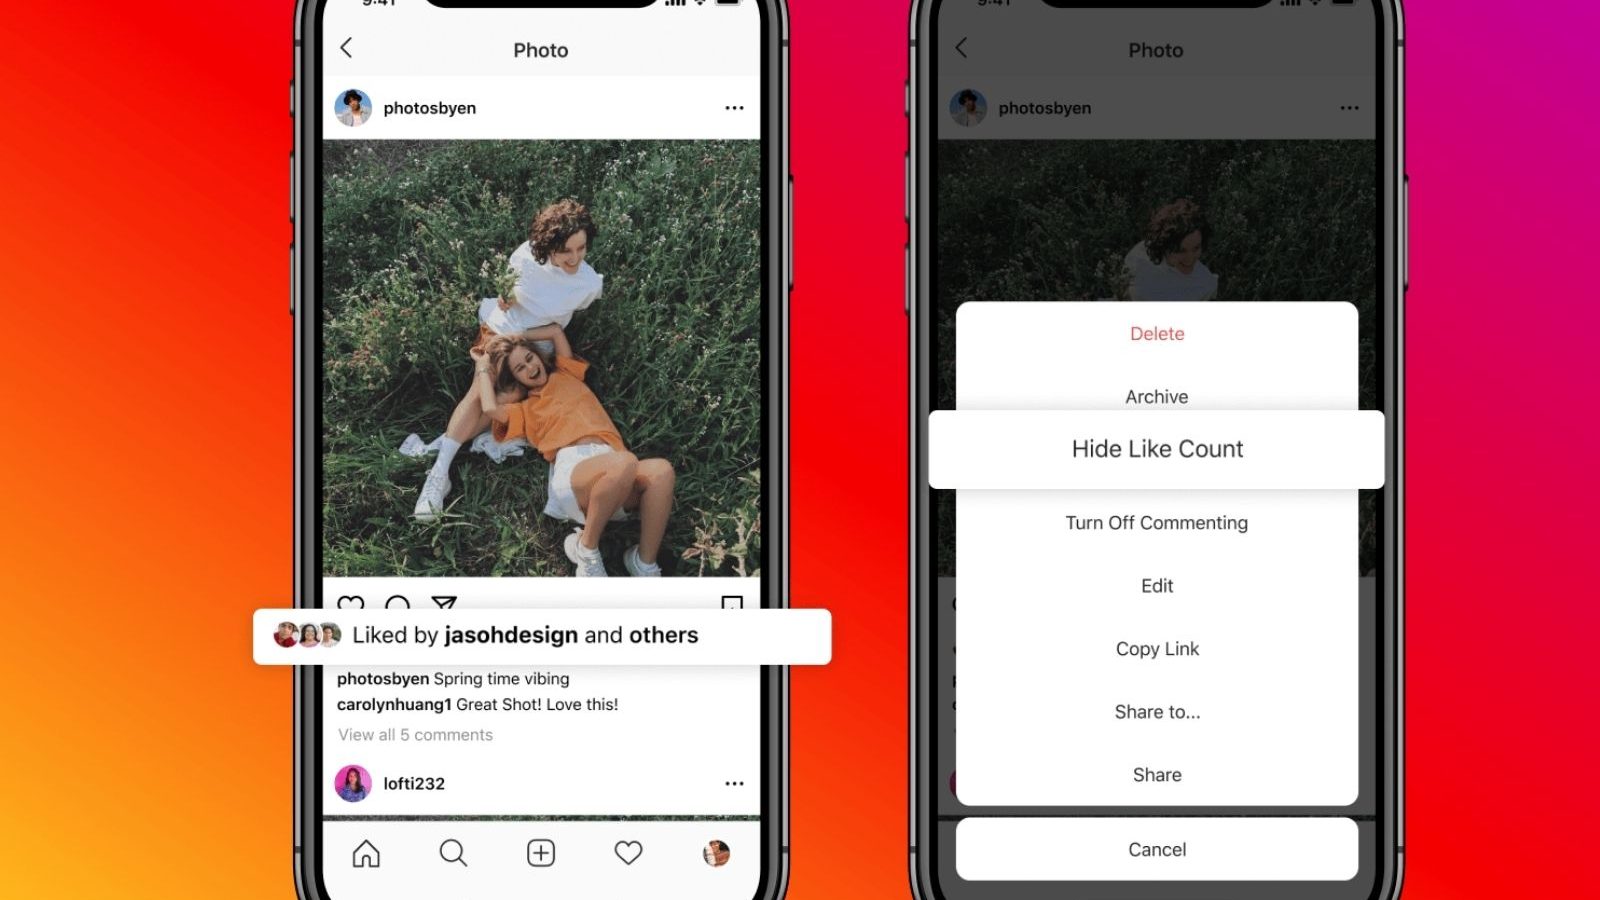 Too Much Pressure? How To Hide Likes and View Counts On Instagram Posts